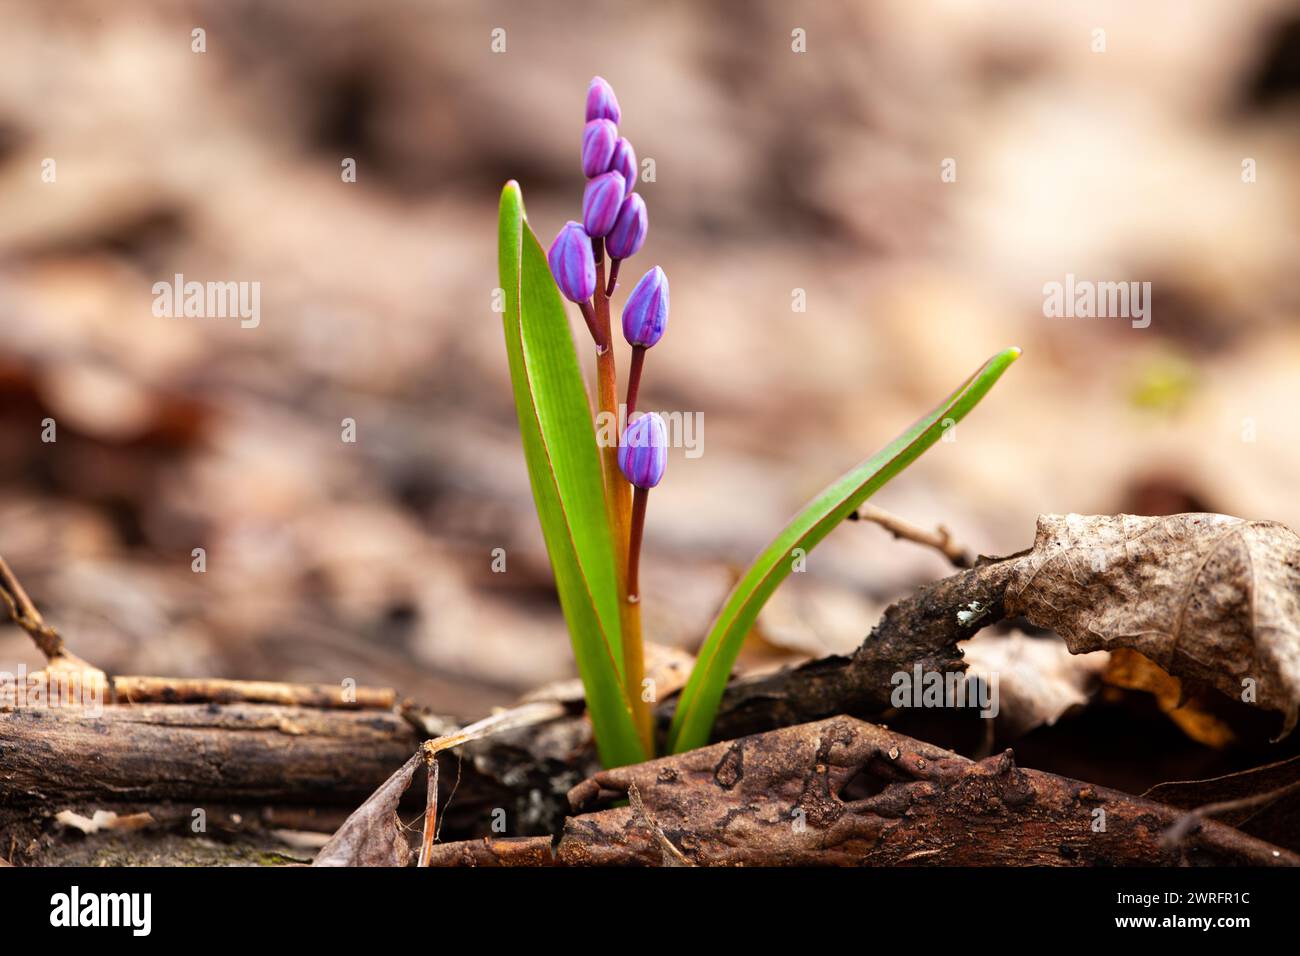 A small purple wildflower, a terrestrial plant, is blooming among the grass and soil. This flowering plant with delicate petals is a herbaceous plant Stock Photo